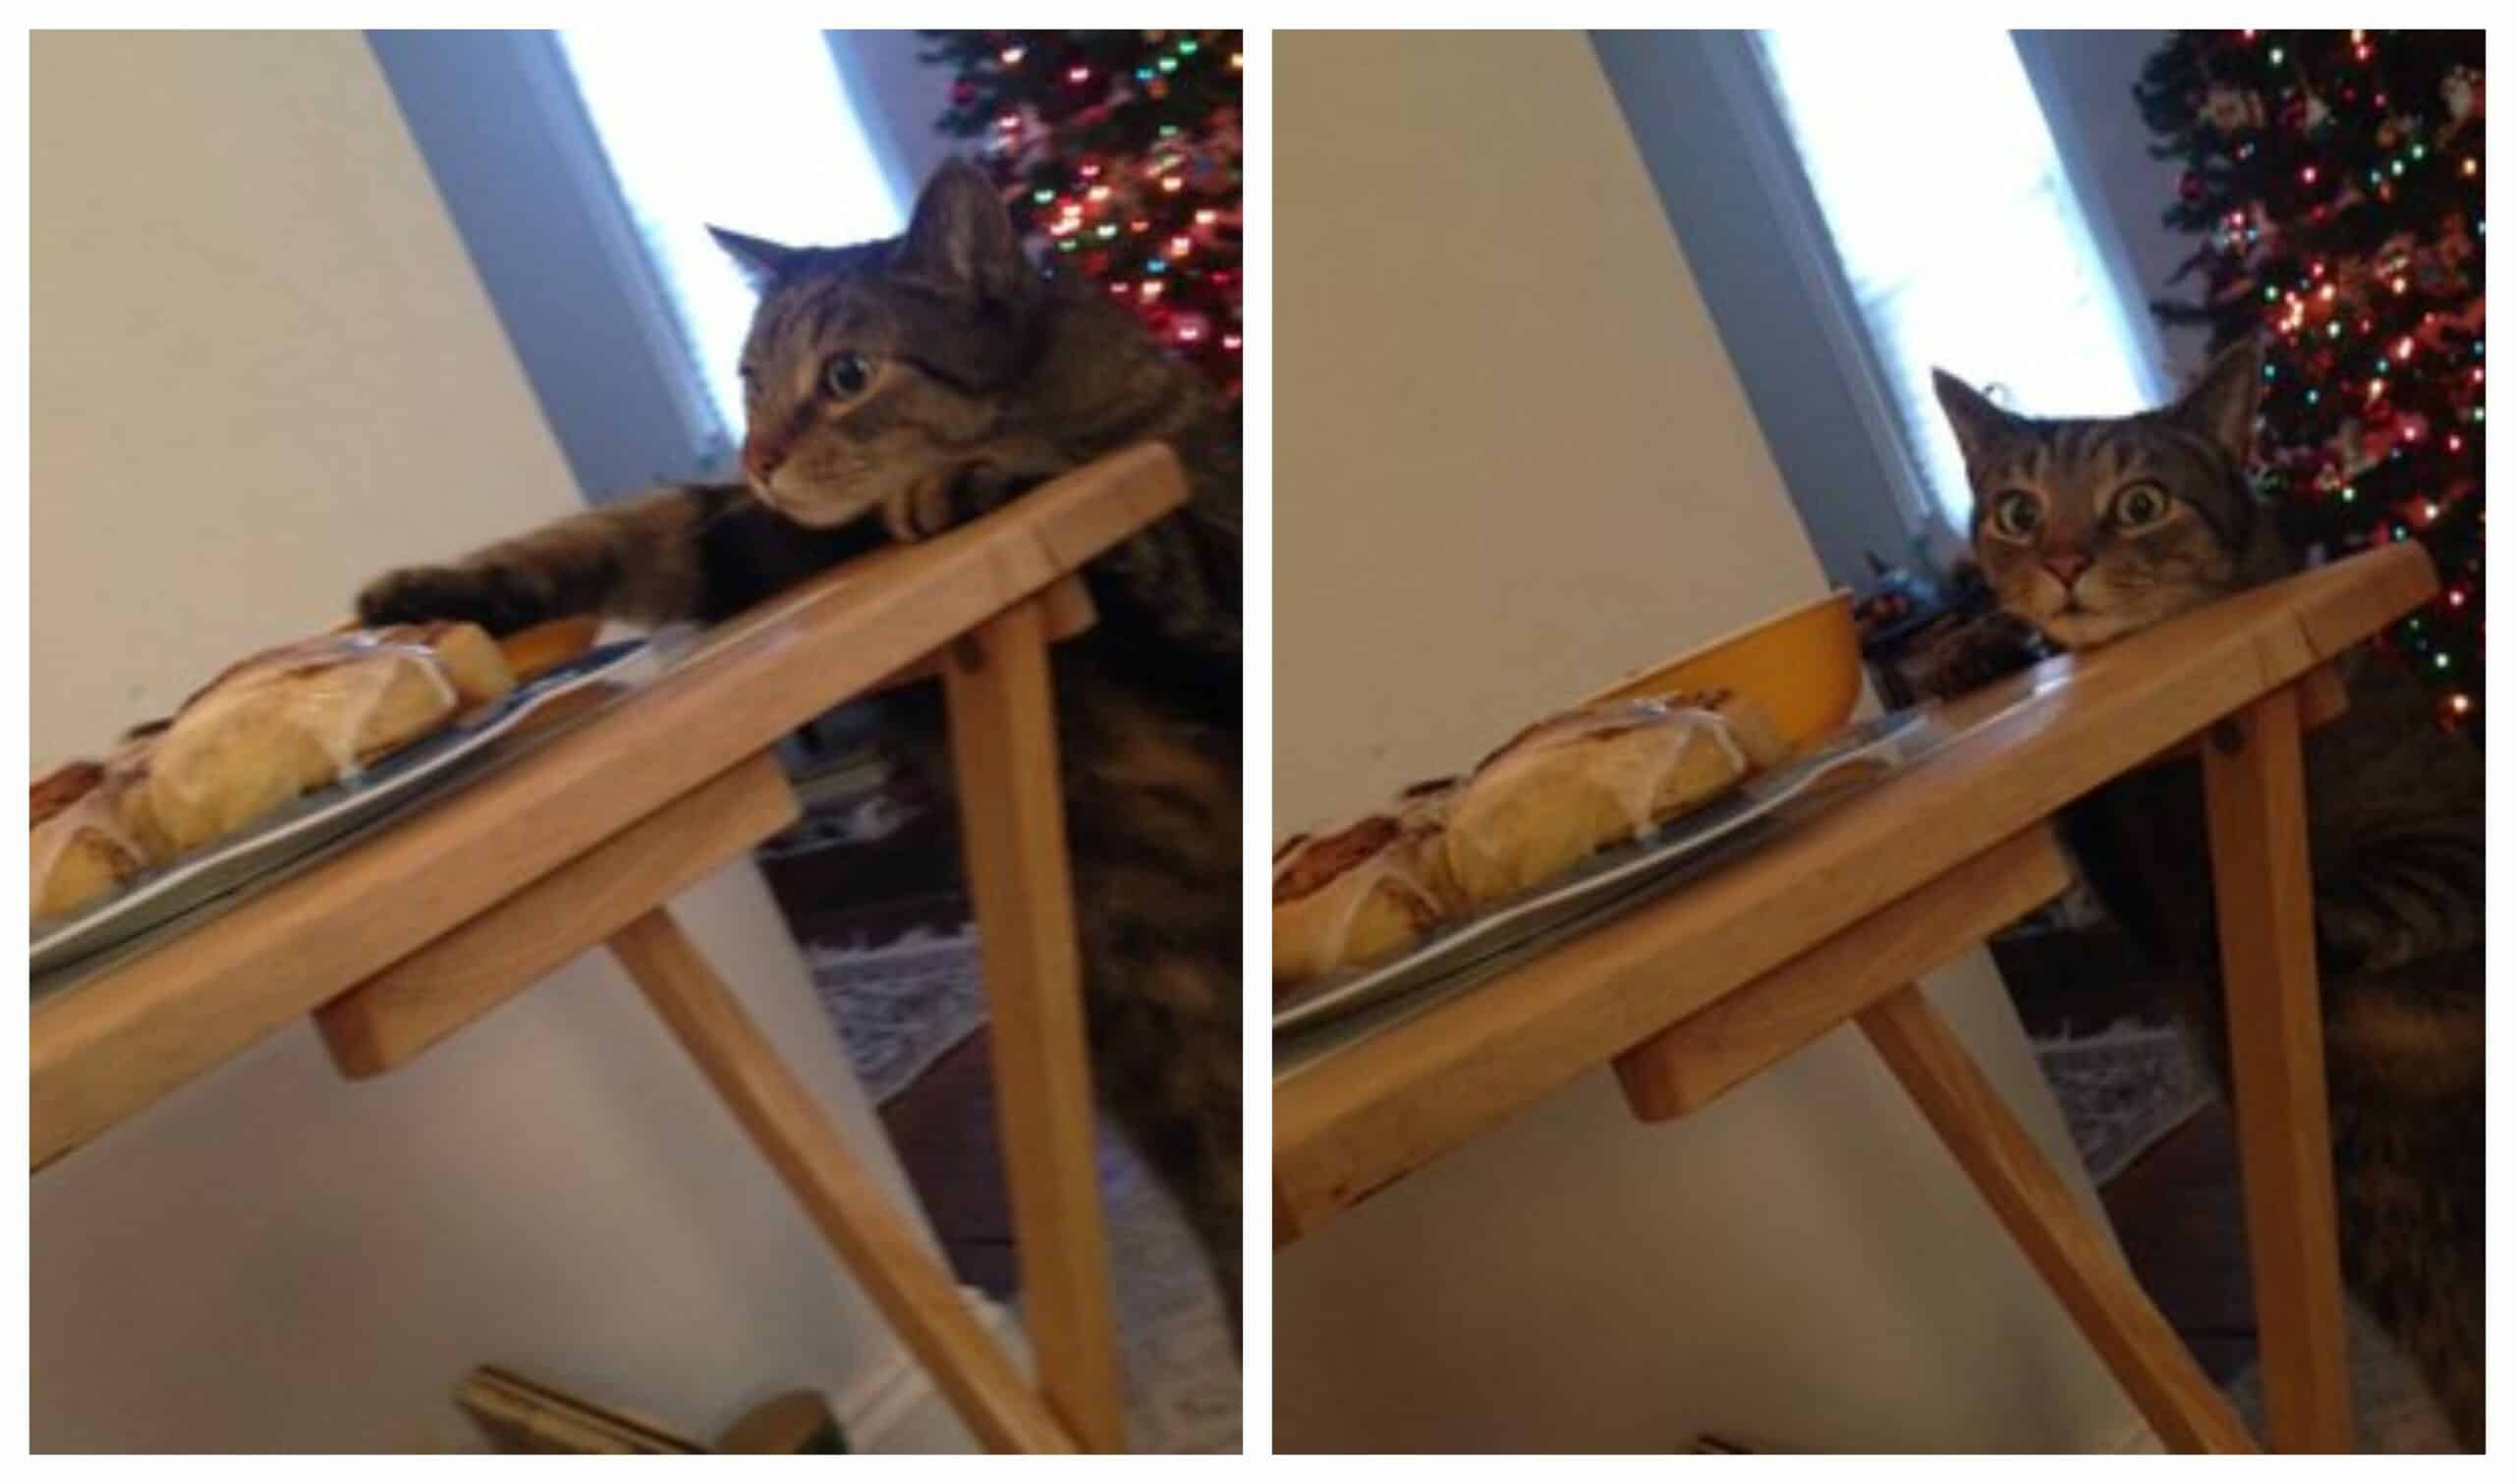 People are admiring this cat's face after finding that he stole a cinnamon bun